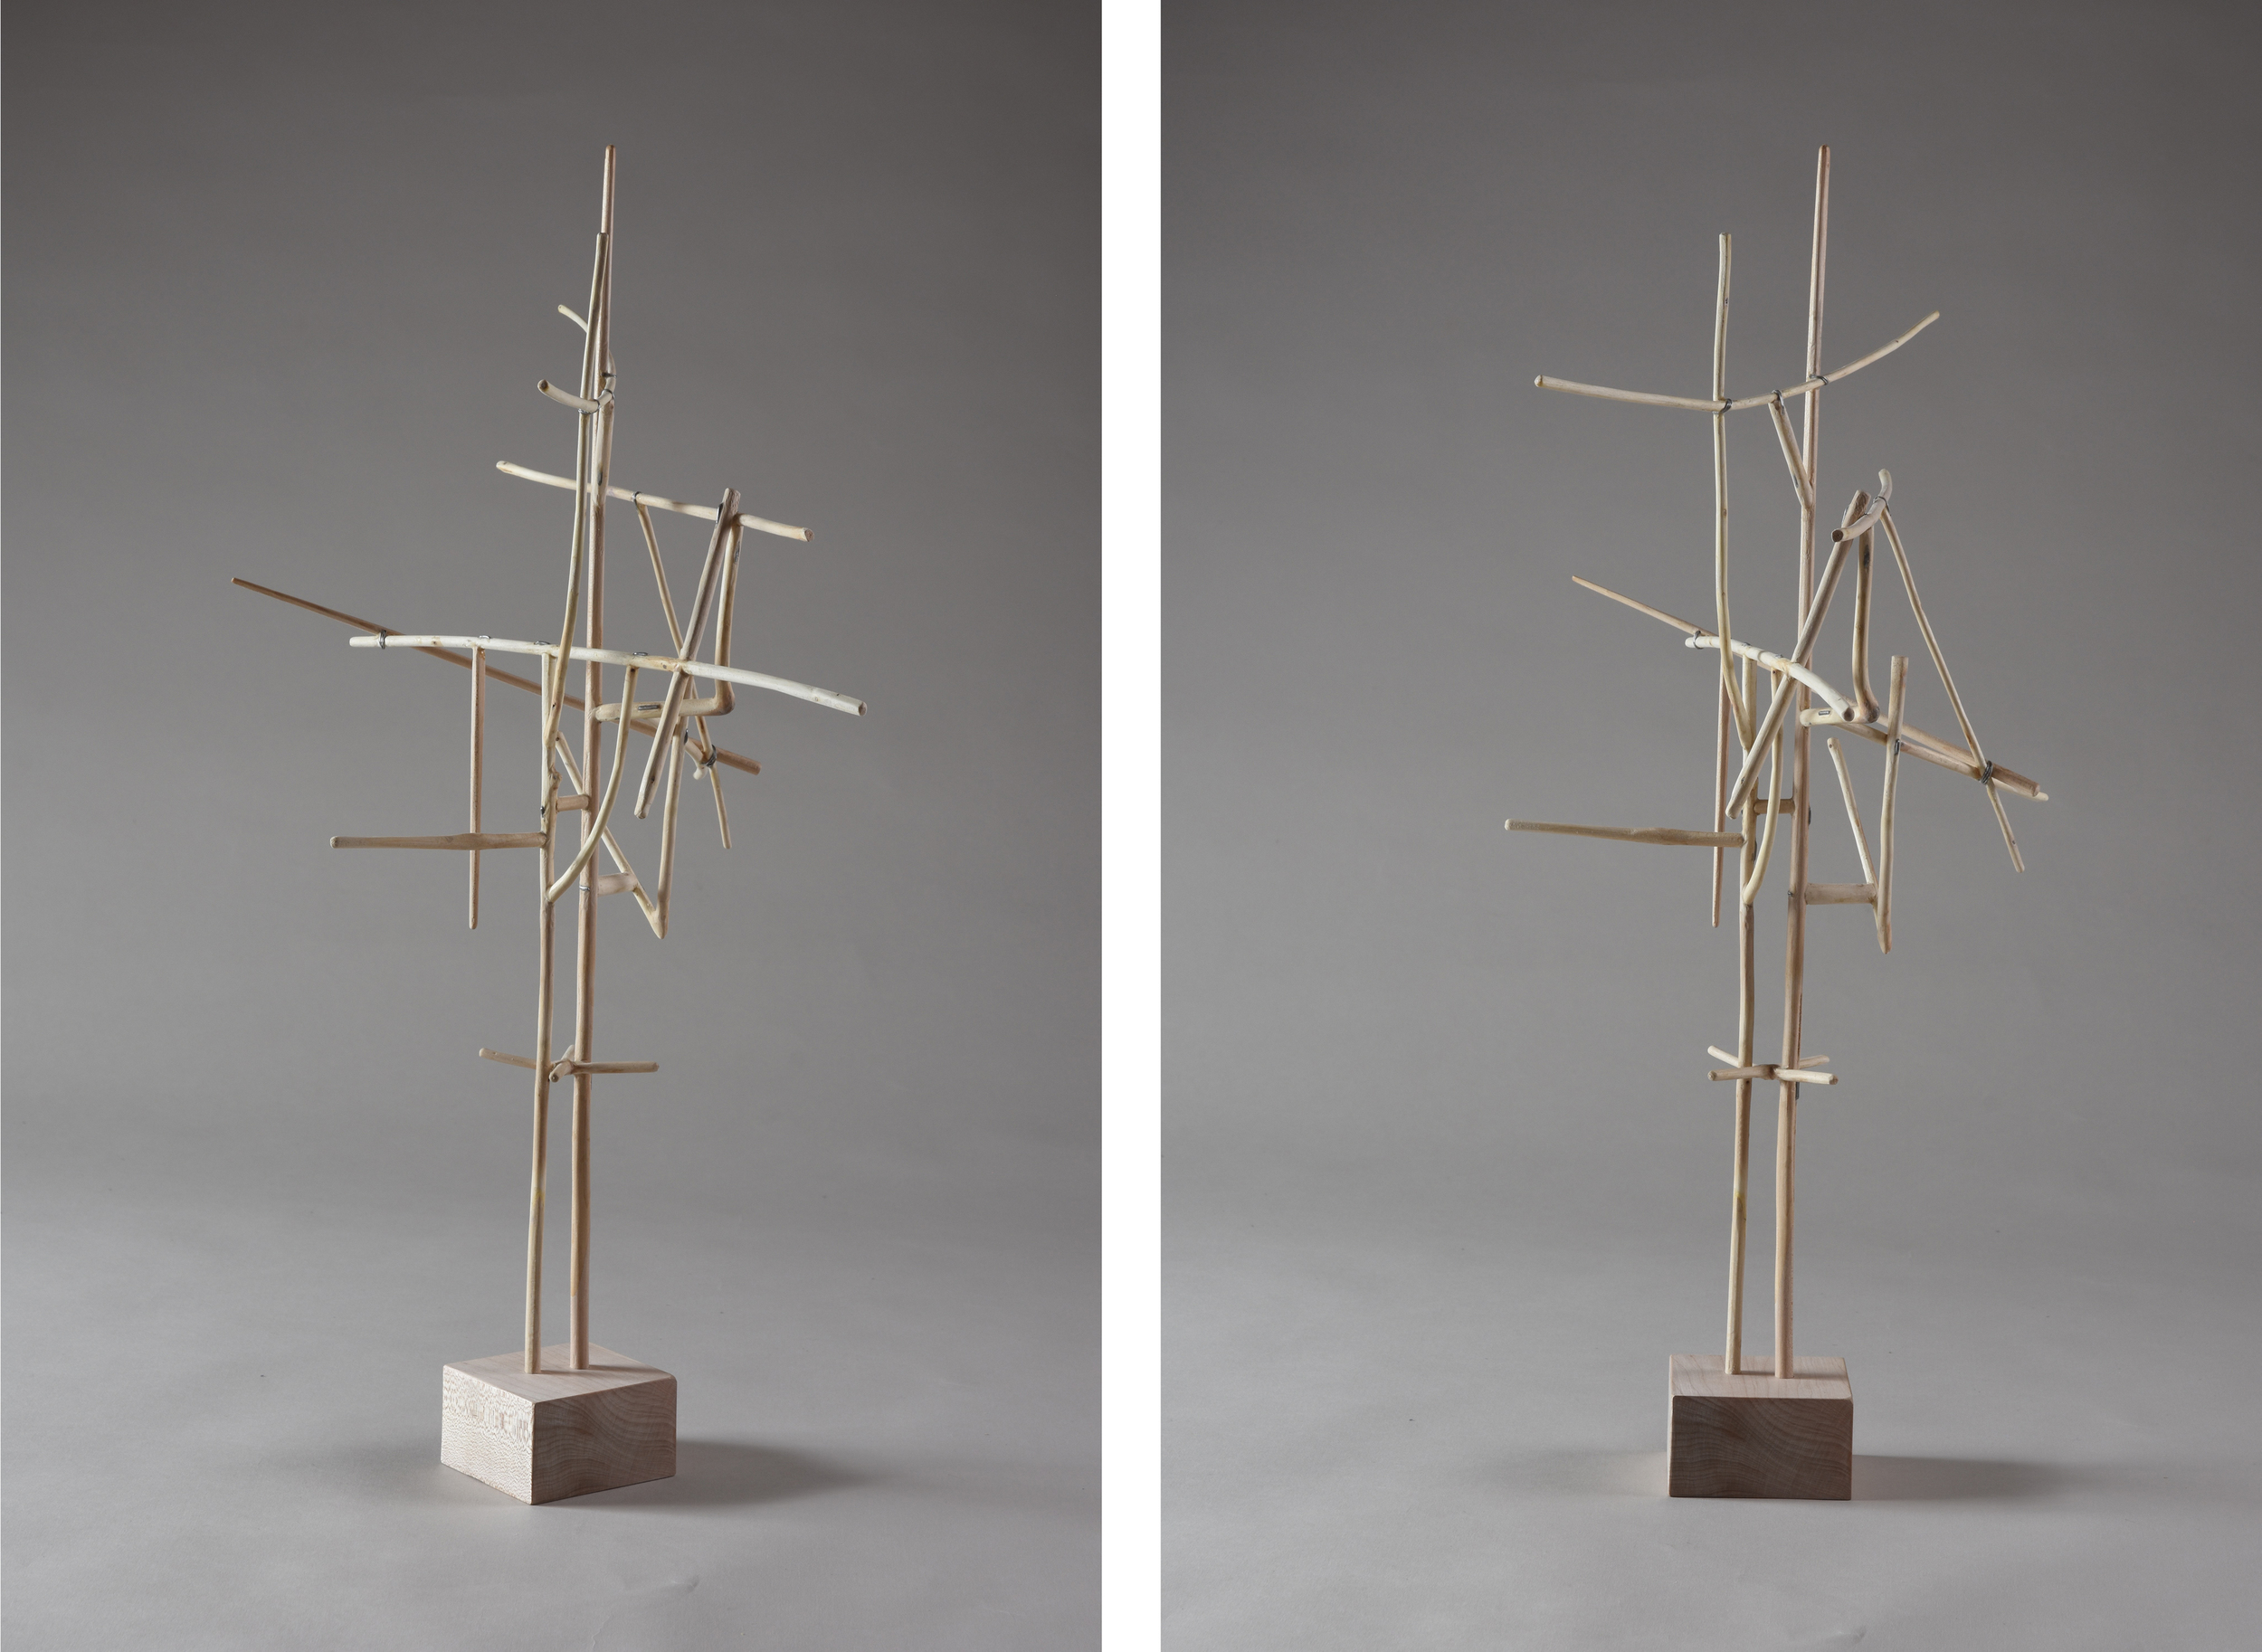   Antenna,  22 1/4 inches, maple, 2015 